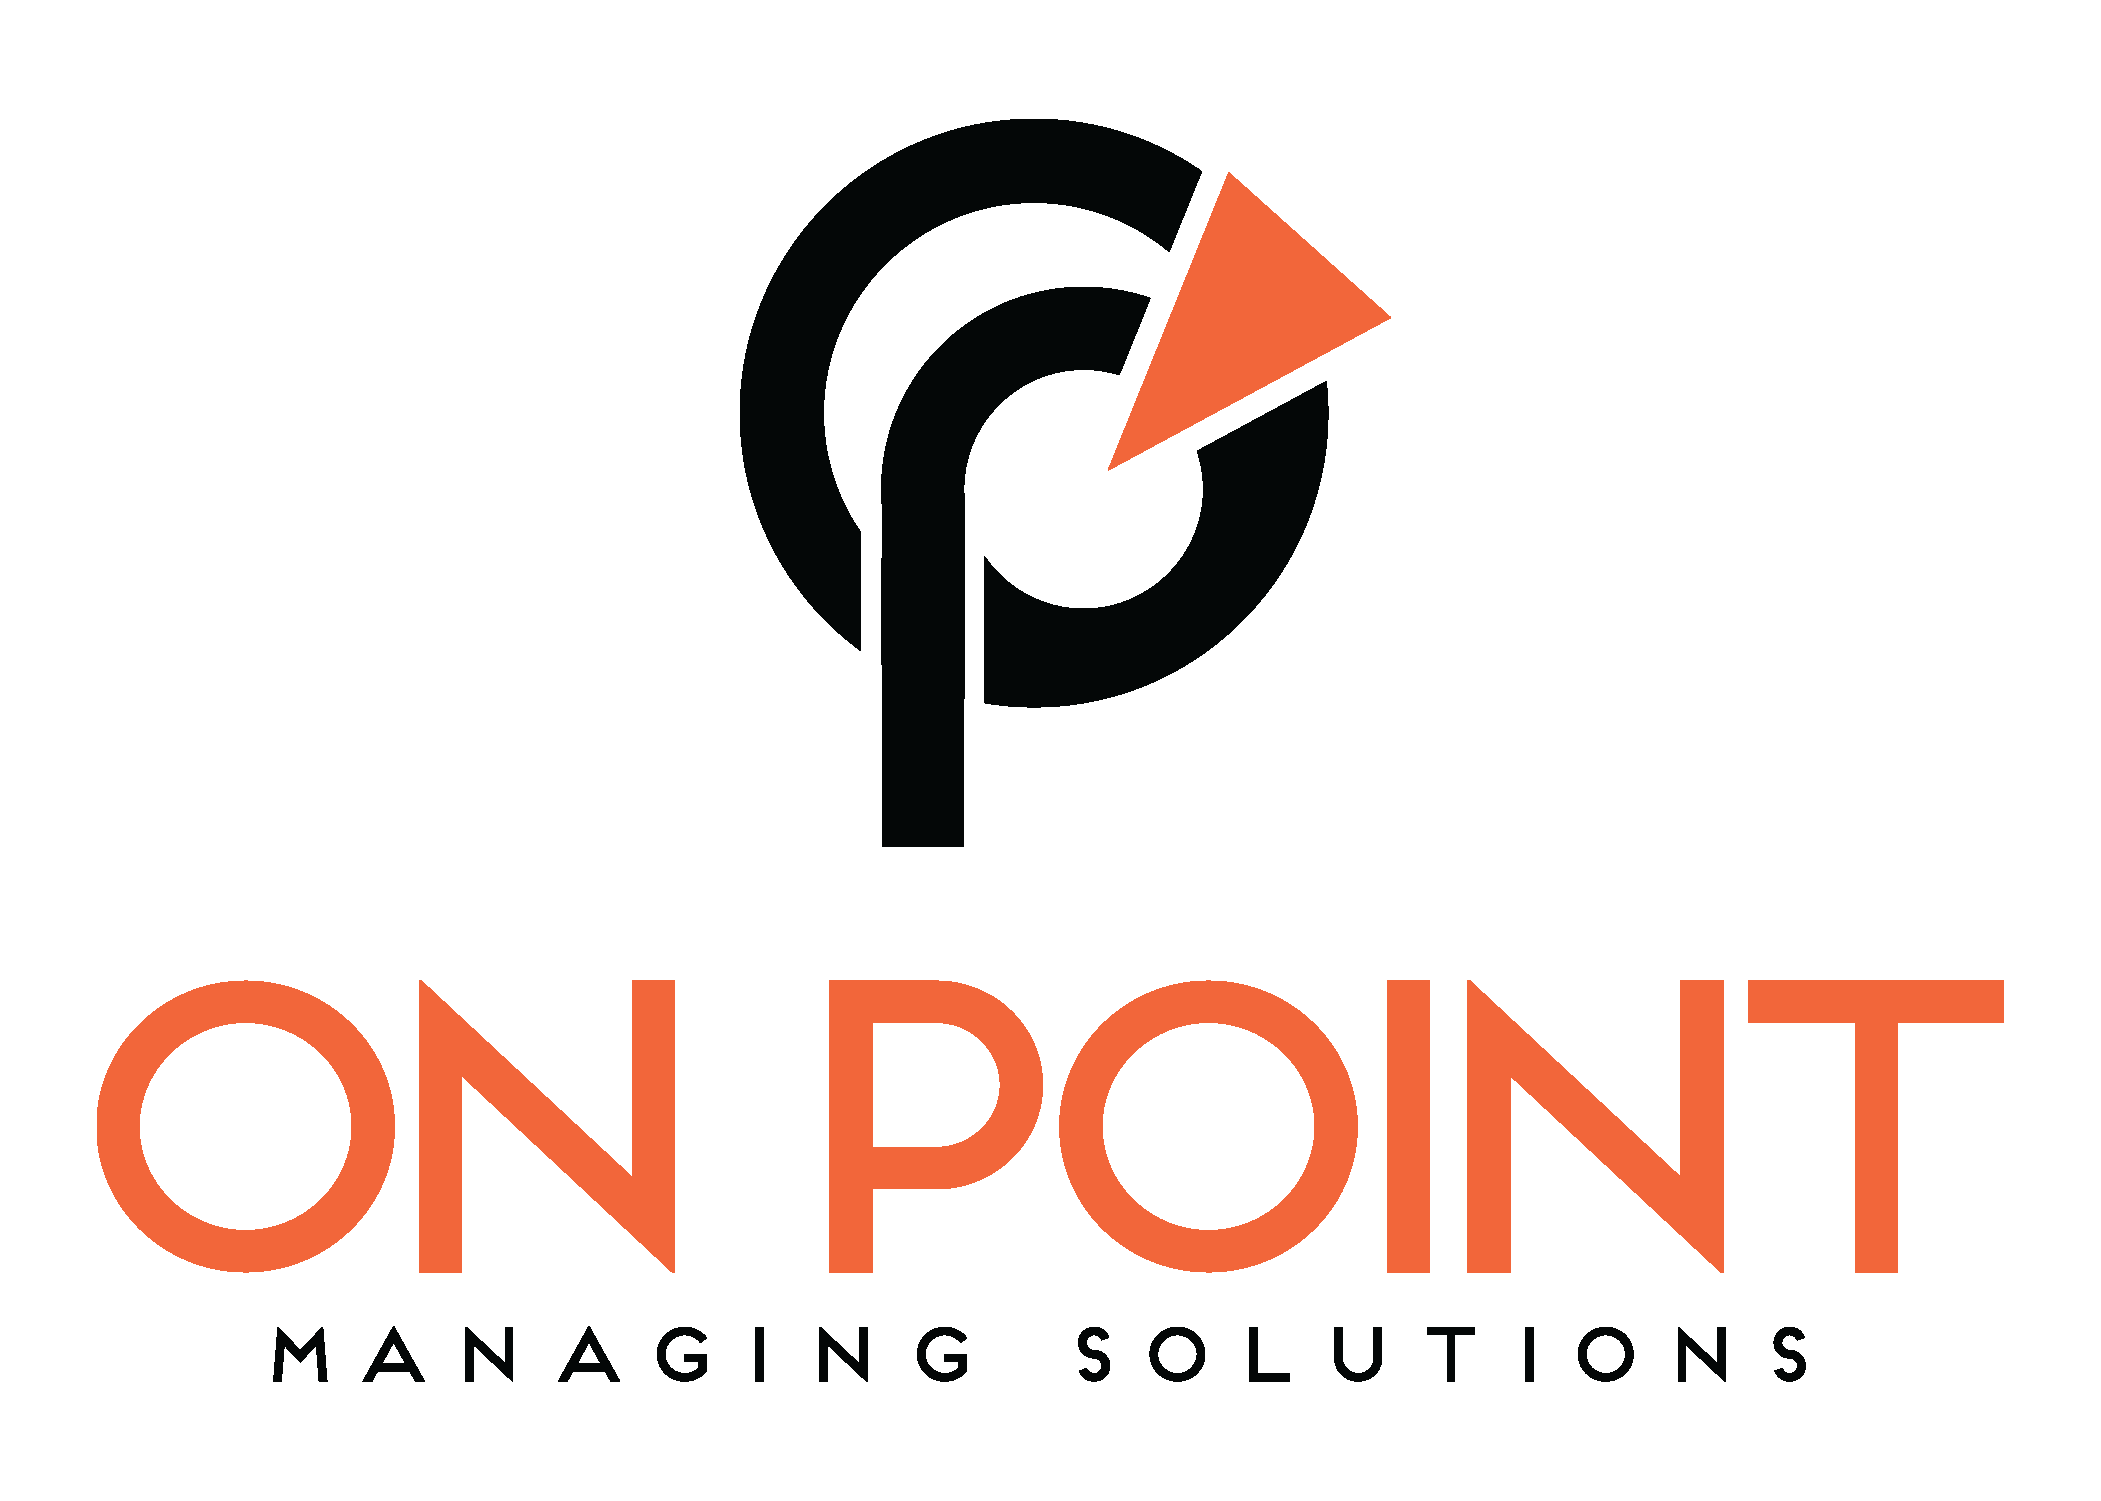 On Point Managing Solutions